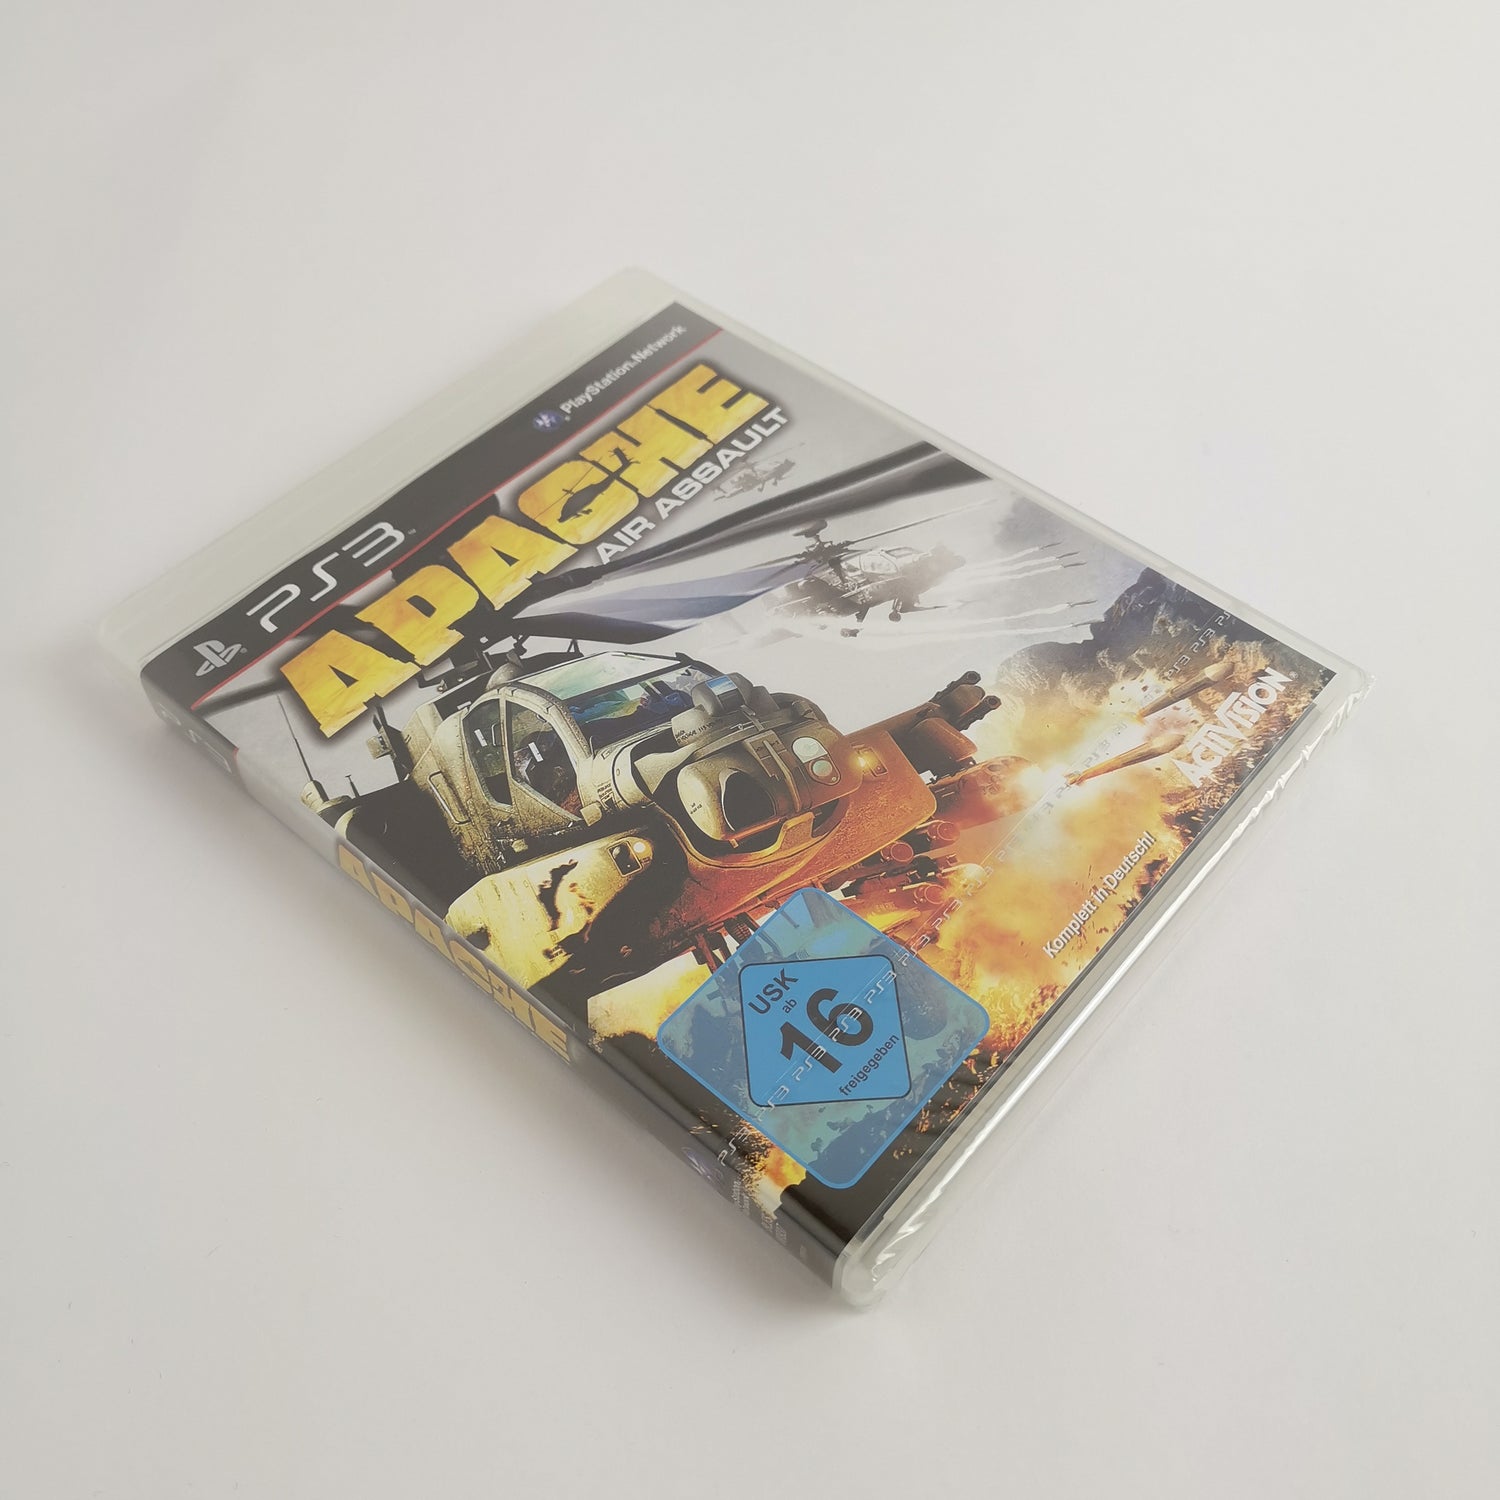 Sony Playstation 3 Game: Apache Air Assault | Original packaging PS3 game - NEW NEW SEALED